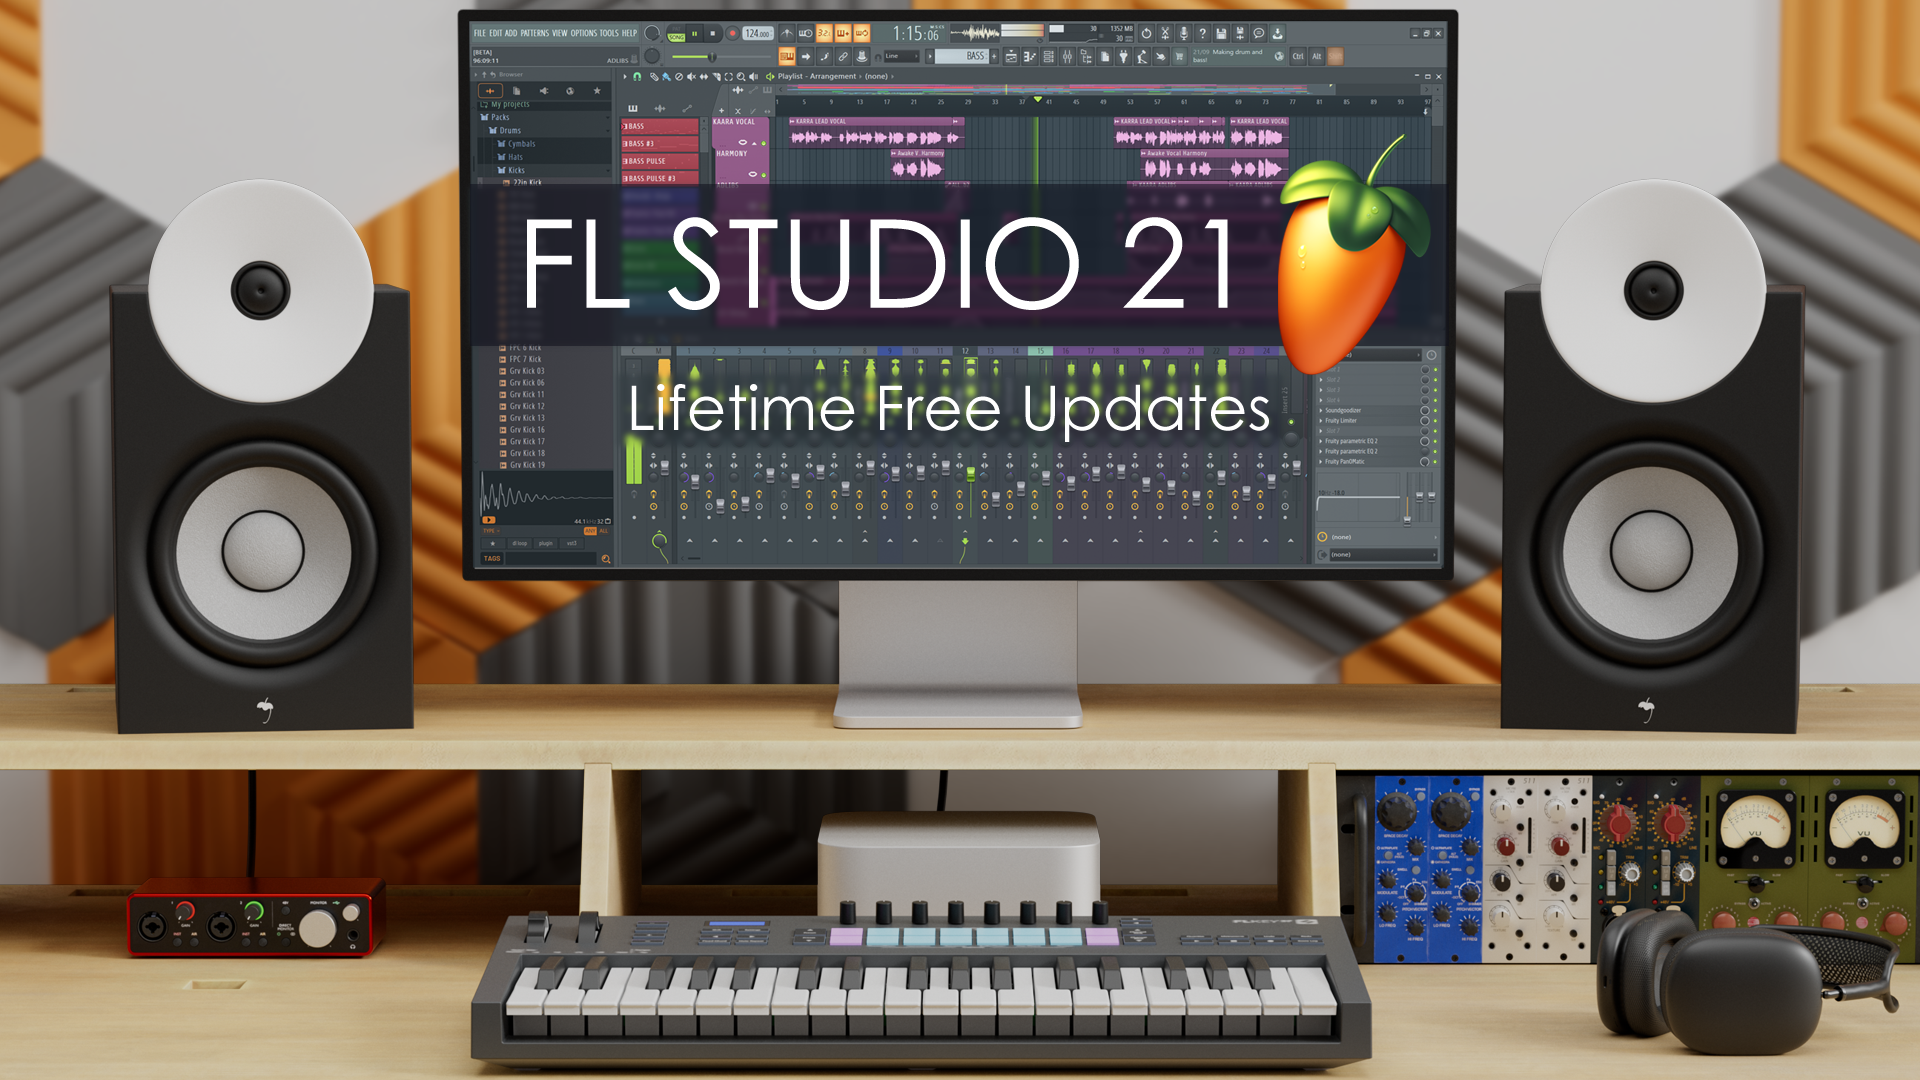 FL Studio 21: A Major Update for Music Producers